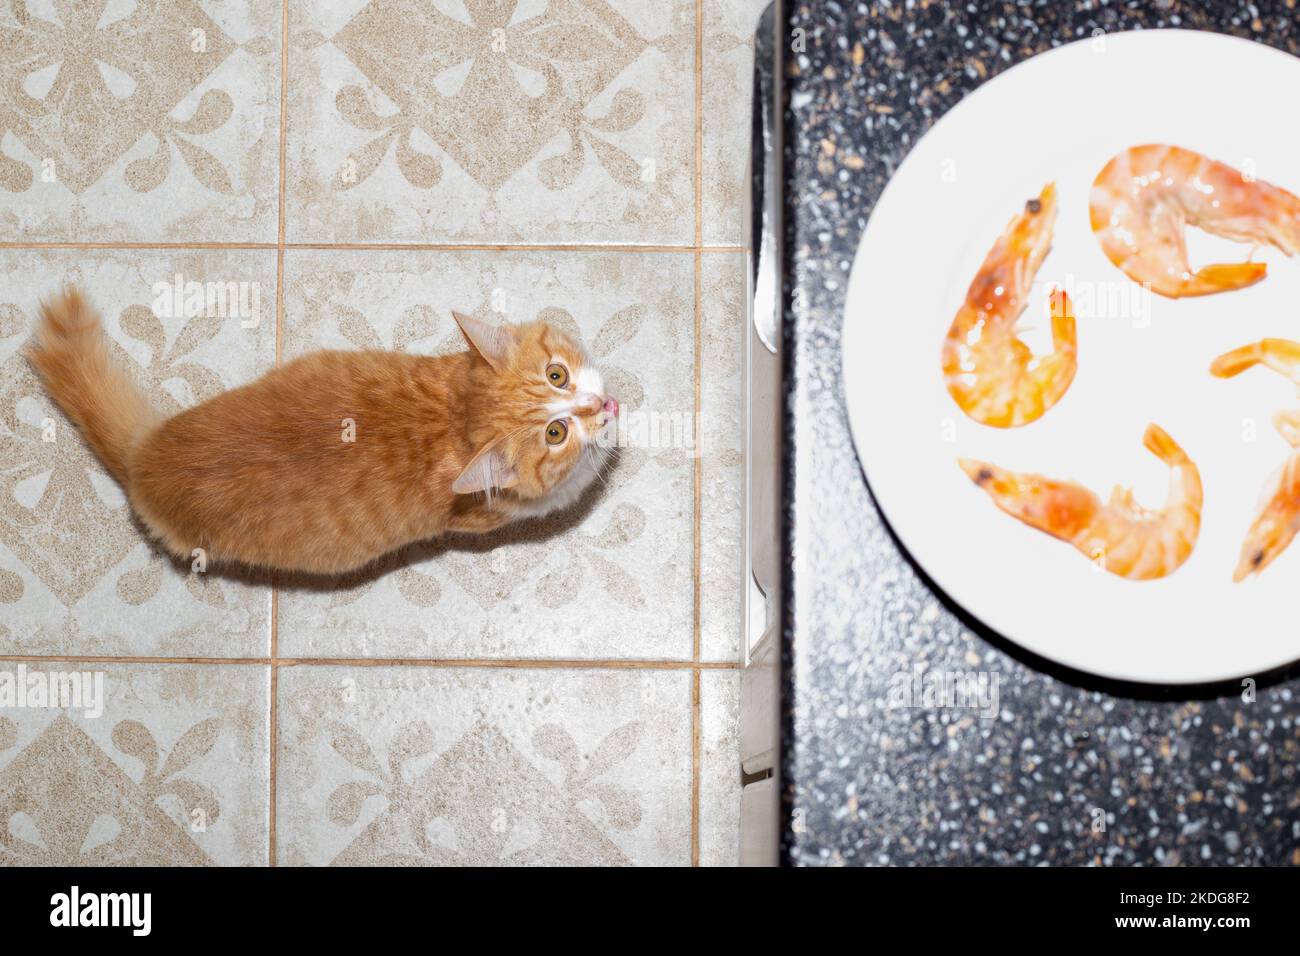 A red kitten in the kitchen looks up and meows, asking for shrimp lying on a plate. Feeding pets. Stock Photo